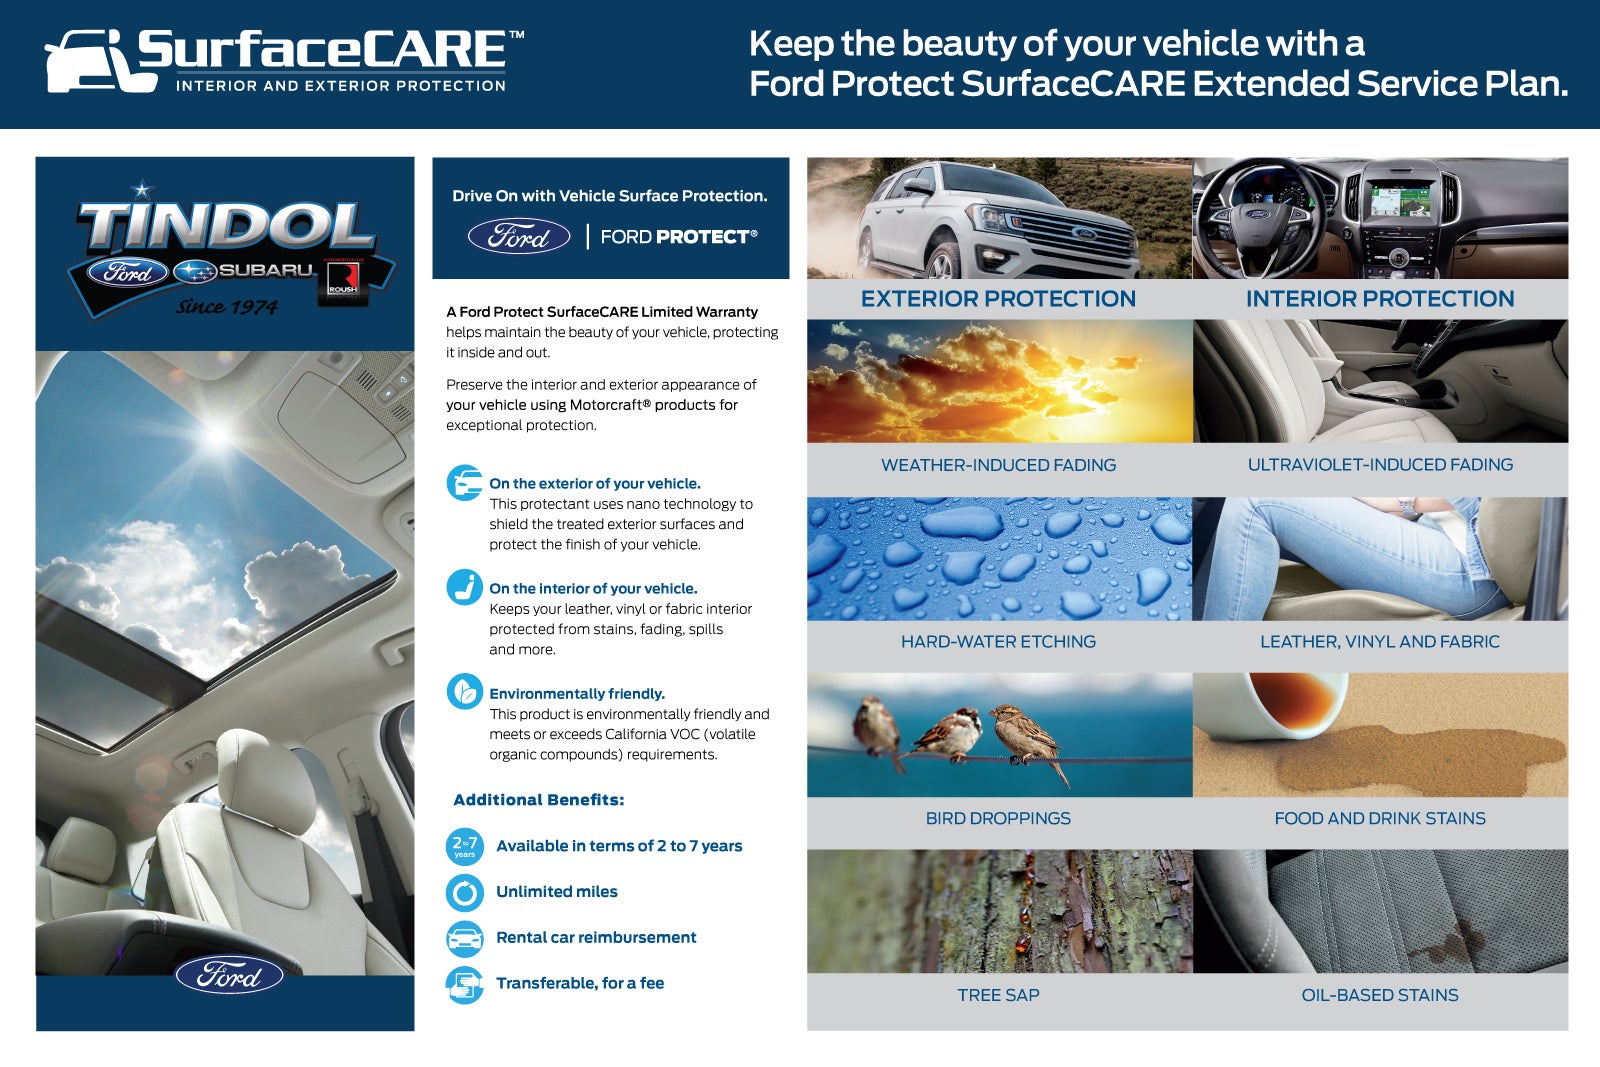 Ford Protect SurfaceCARE